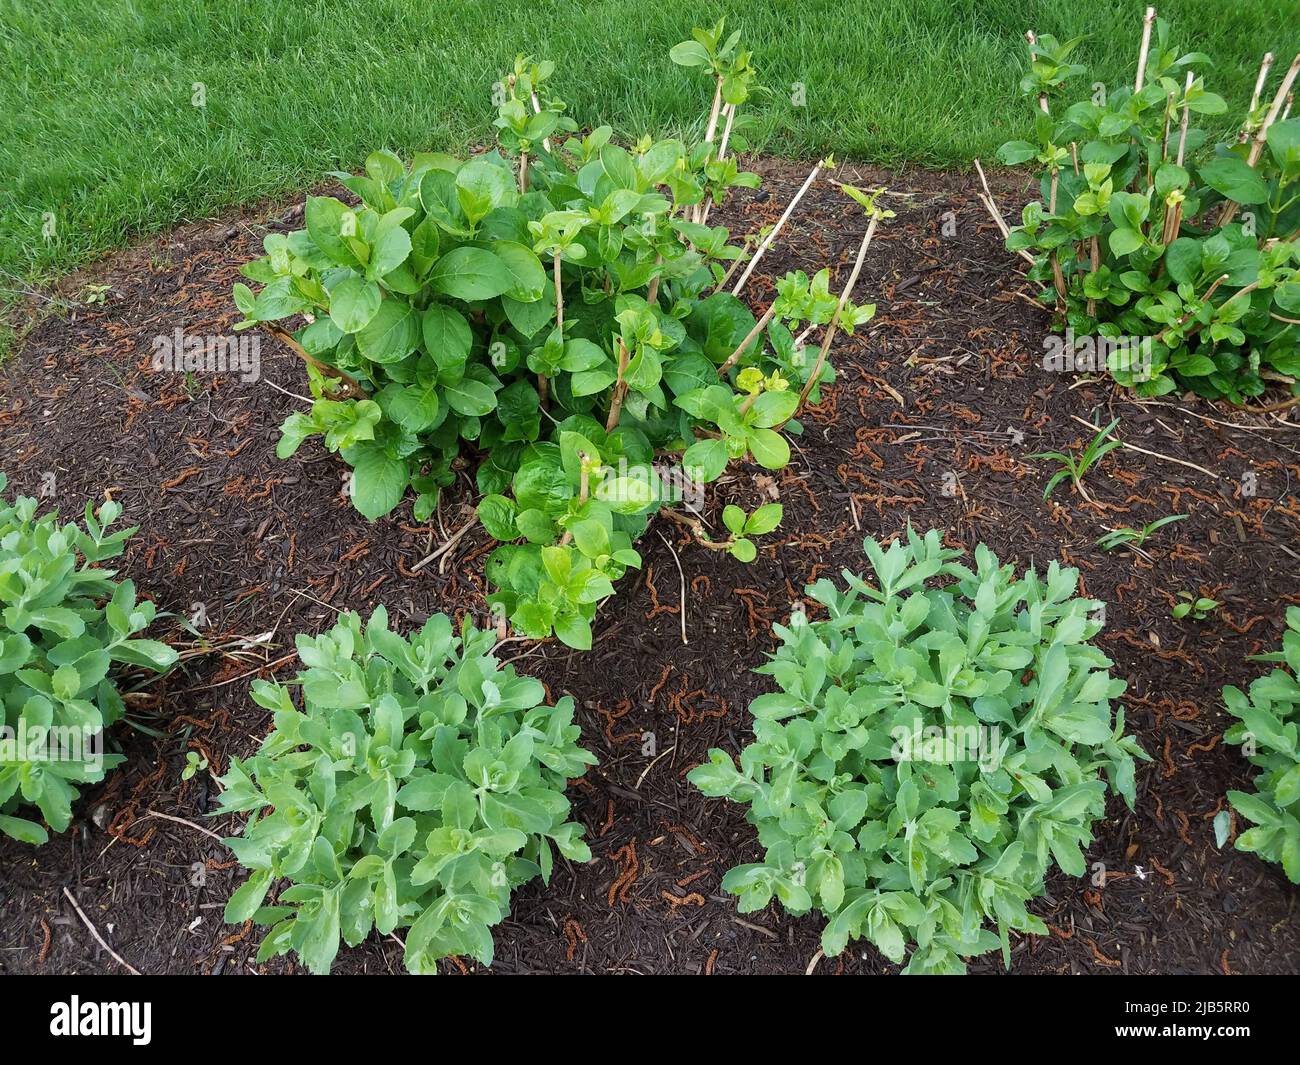 wet green leaves on plant or bush in brown mulch or soil. Stock Photo